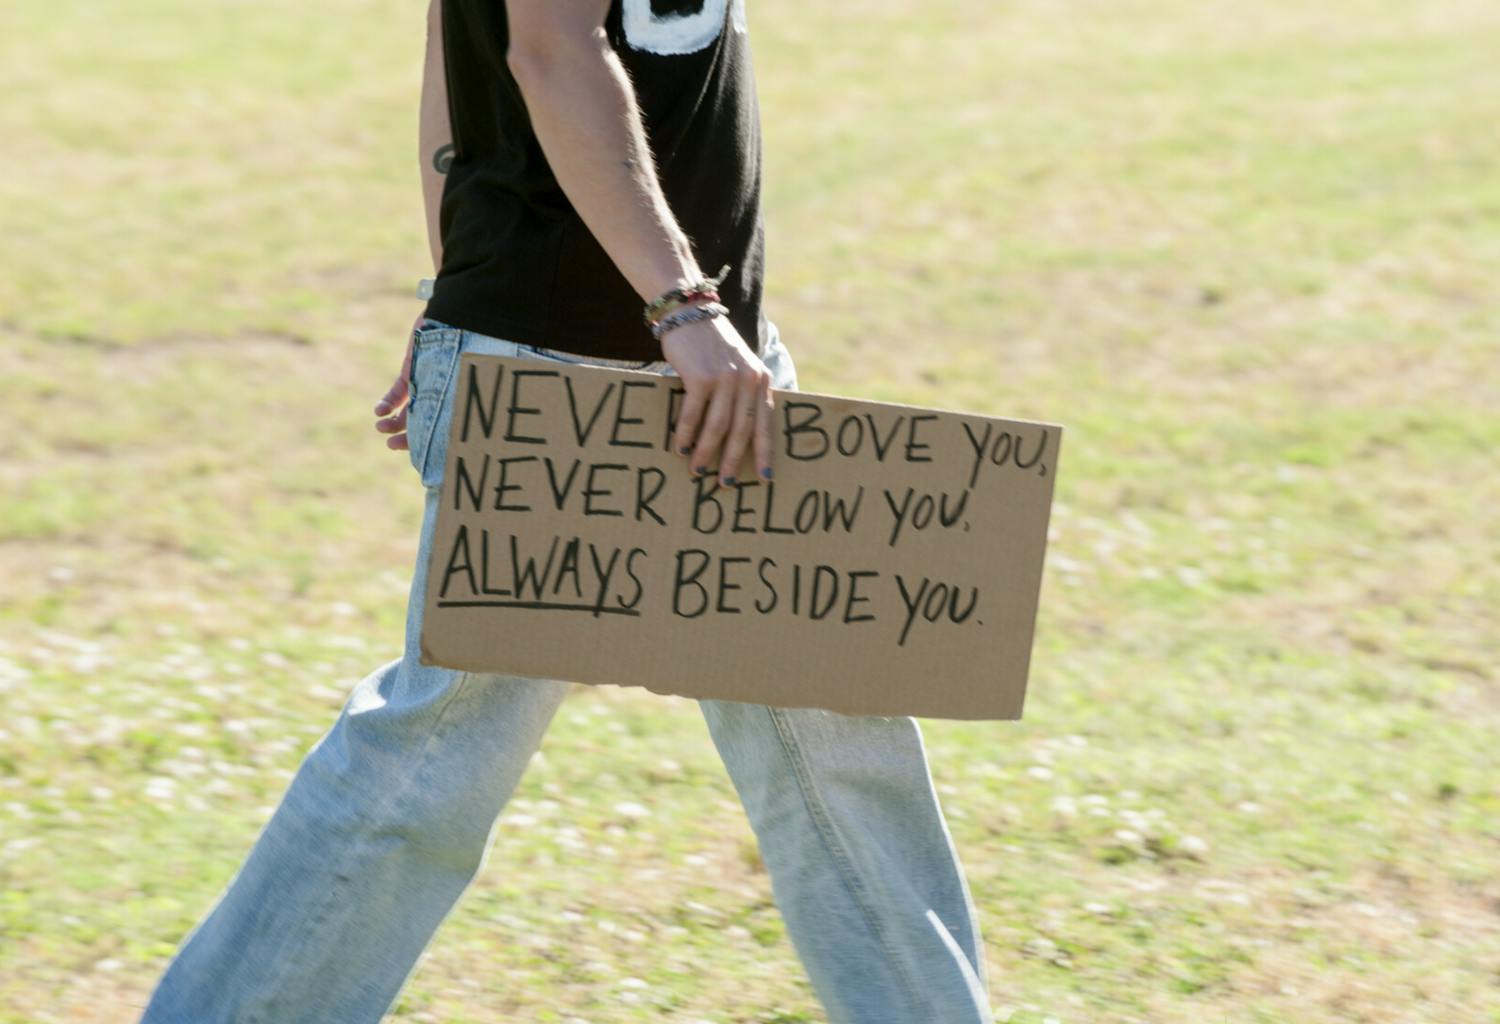 Protest sign that says "Never above you, never below you, ALWAYS beside you."